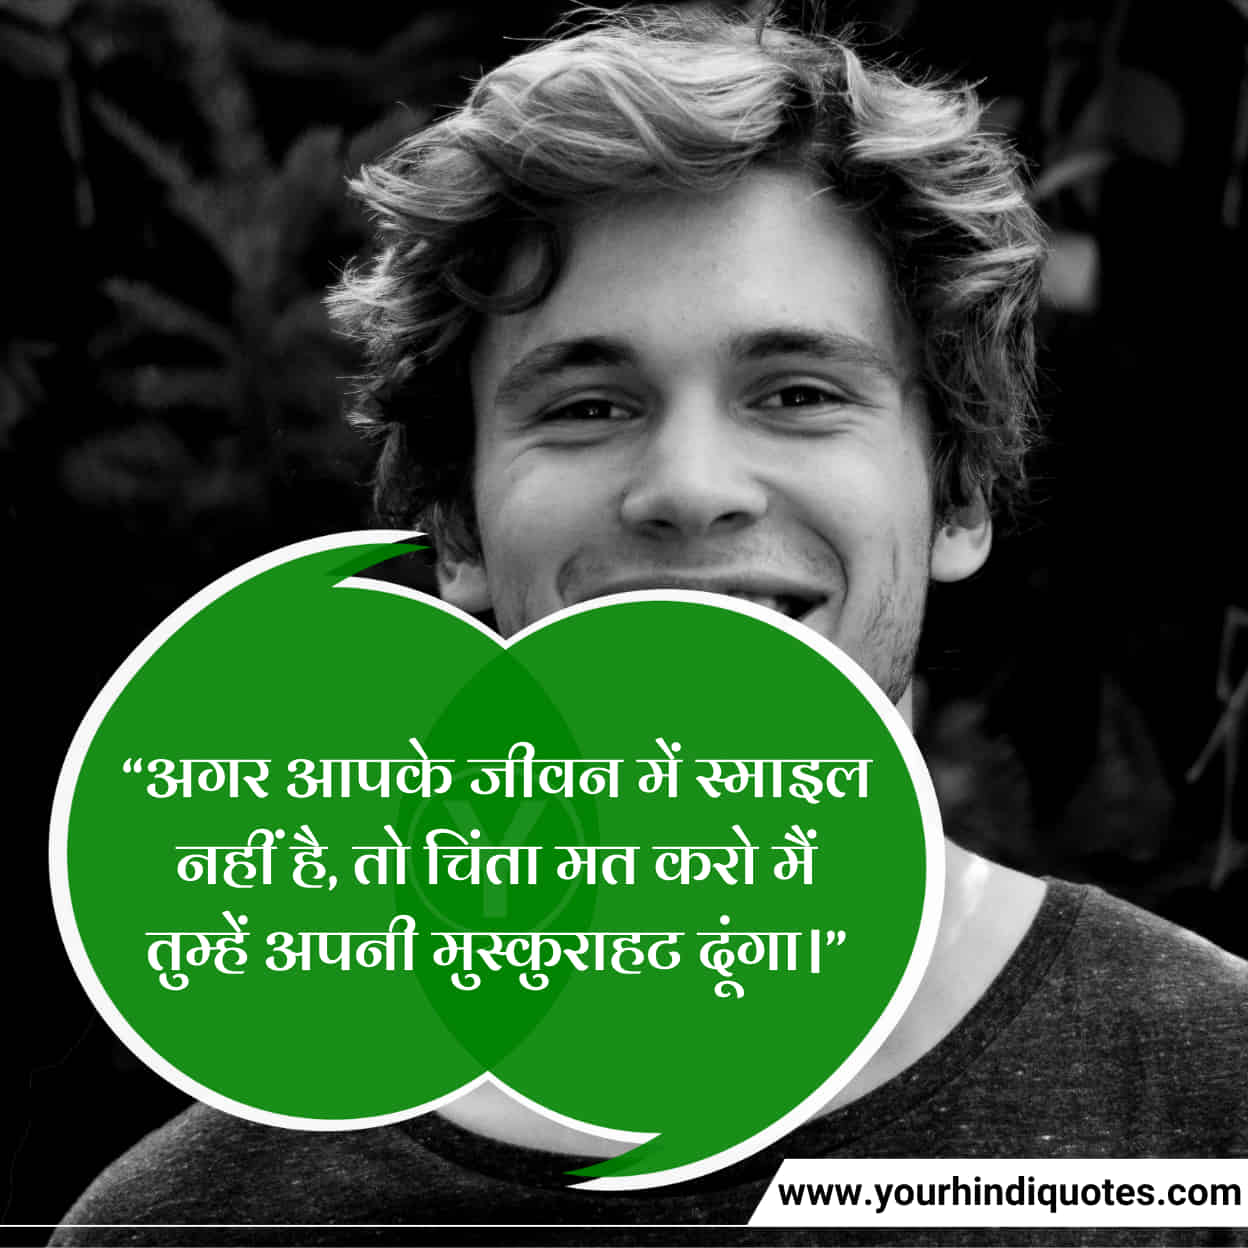 Best Hindi Smile Quotes